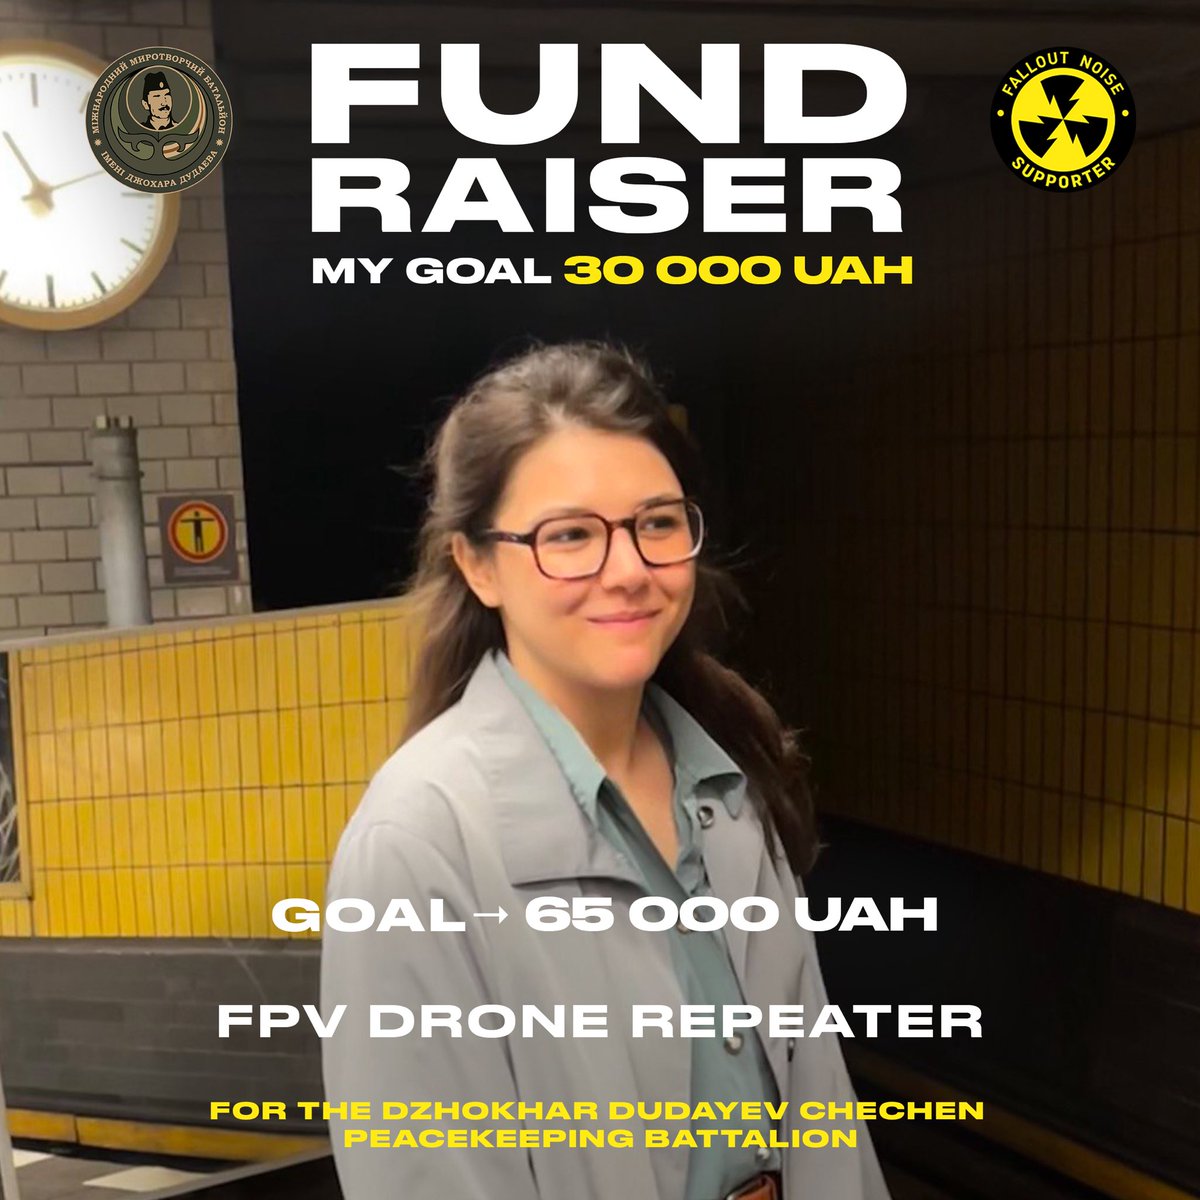 hi there @fallout_noise invites you to engage in transformative decolonial practices! this is a collective fundraiser for a FPV drone repeater for a unit where our friend now serves it costs 65k UAH. I am raising 30k UAH paypal: bogachov@protonmail.com